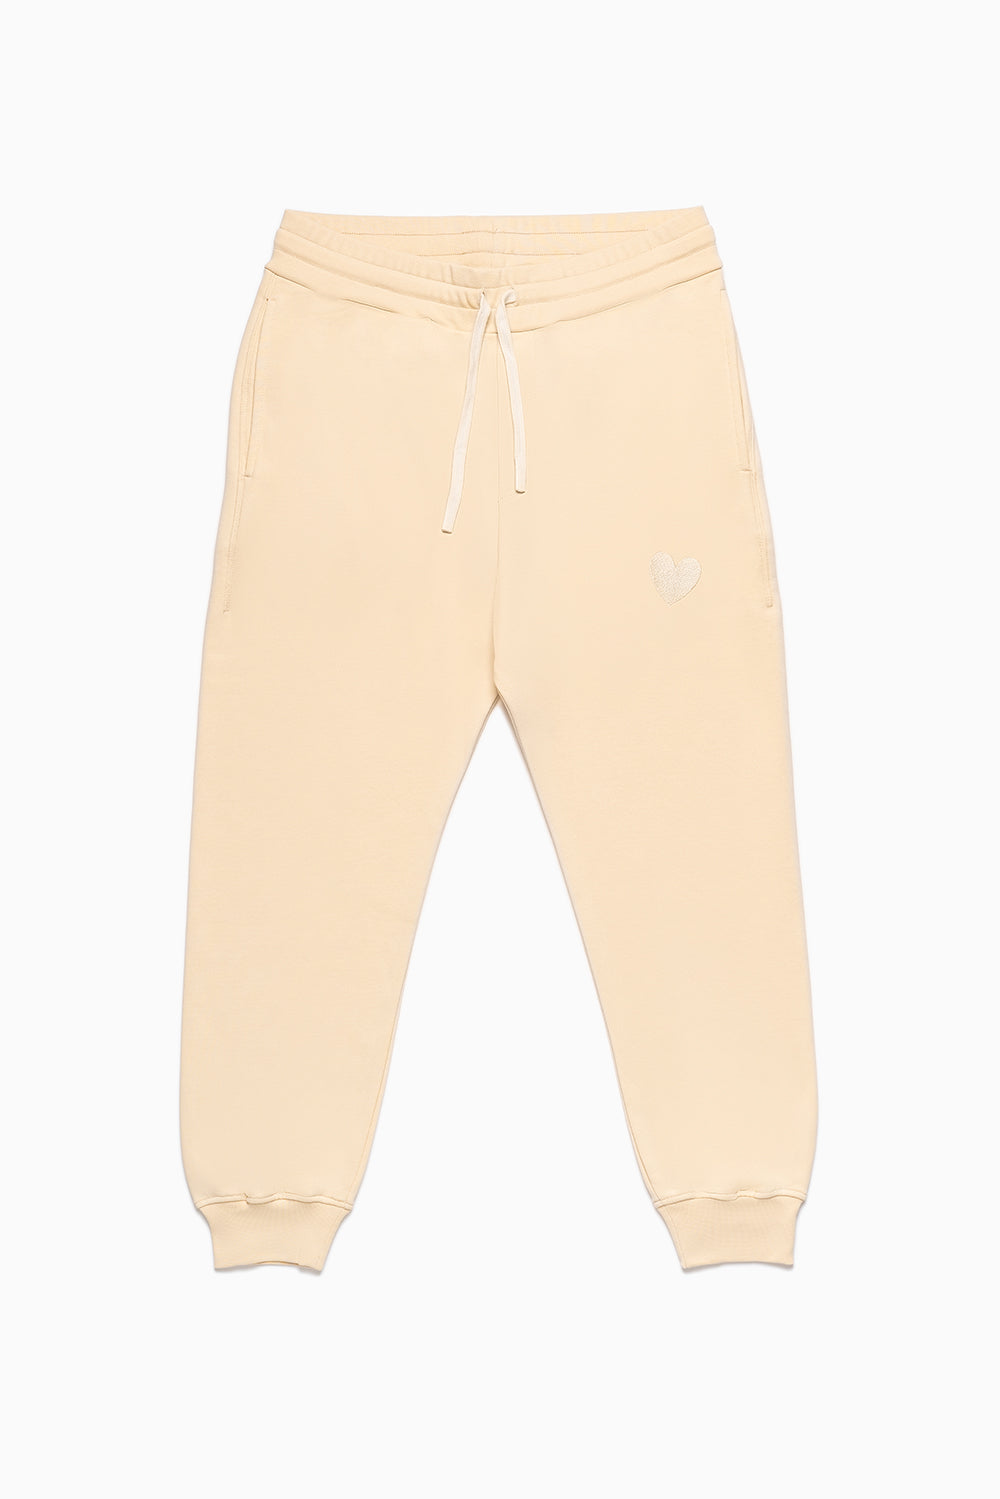 Classic Embroidery Heart Sweatpants